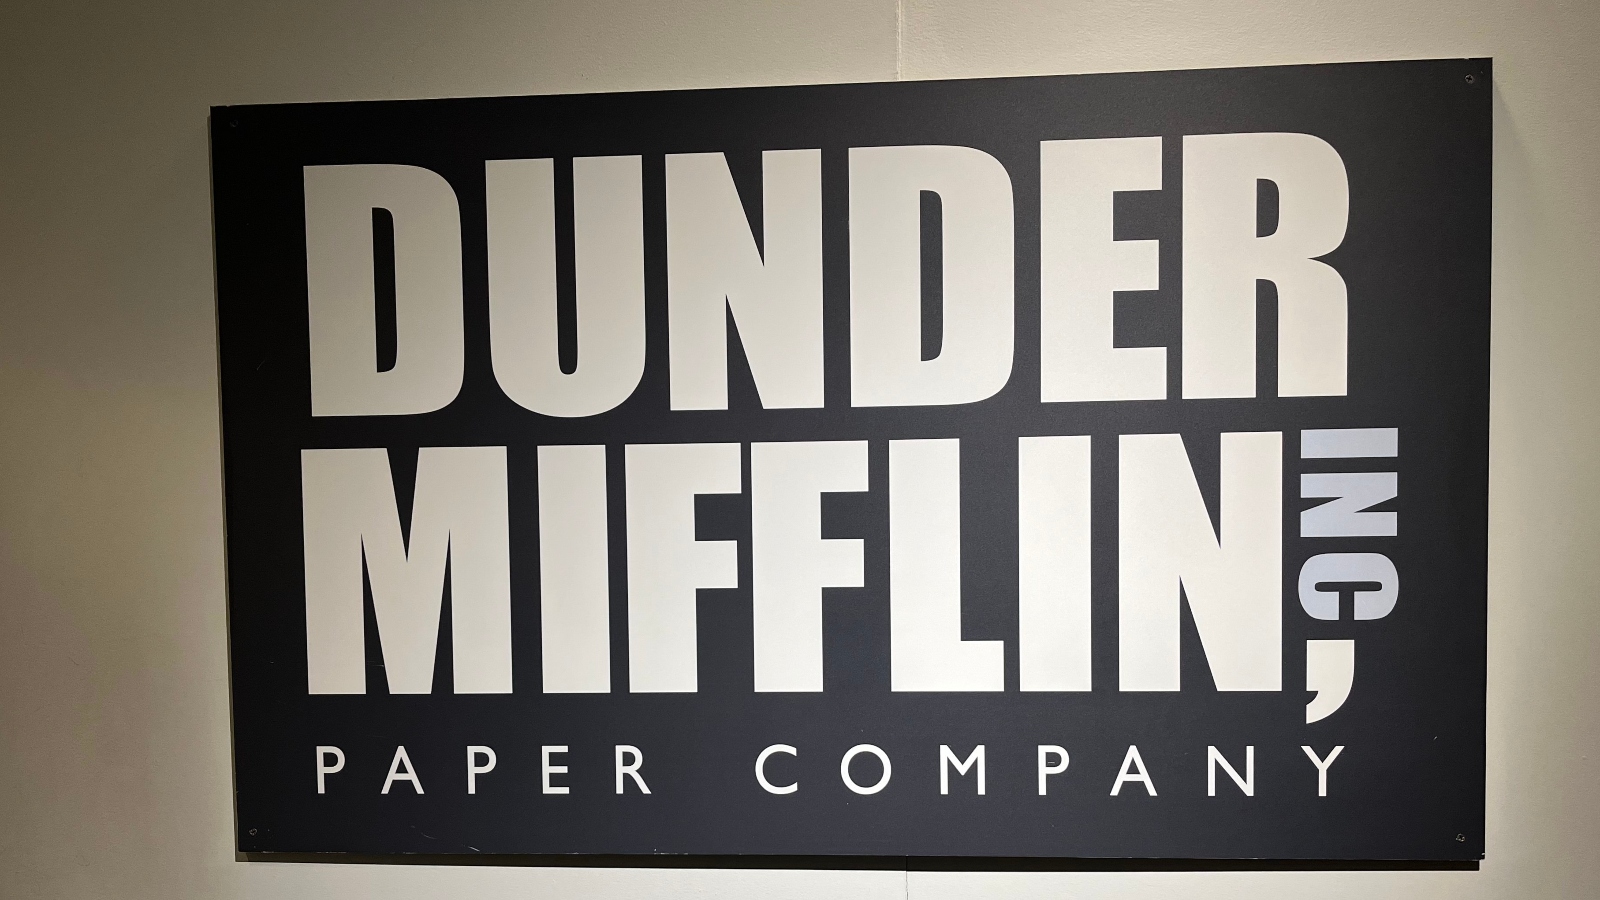 Dunder Mifflin from The Office